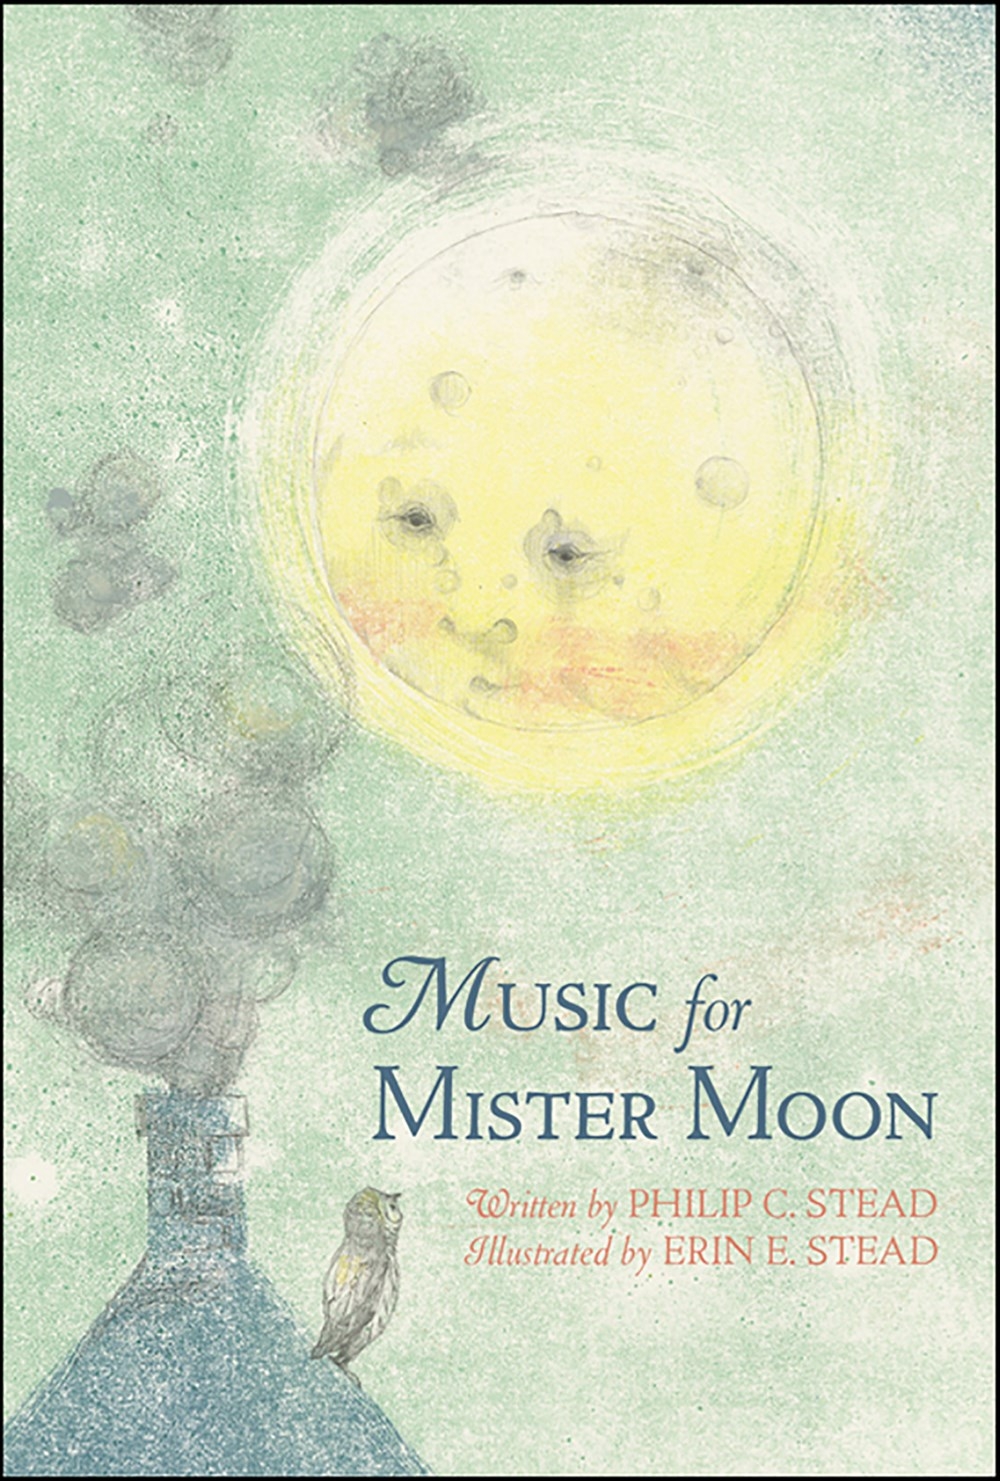 Image for "Music for Mister Moon"